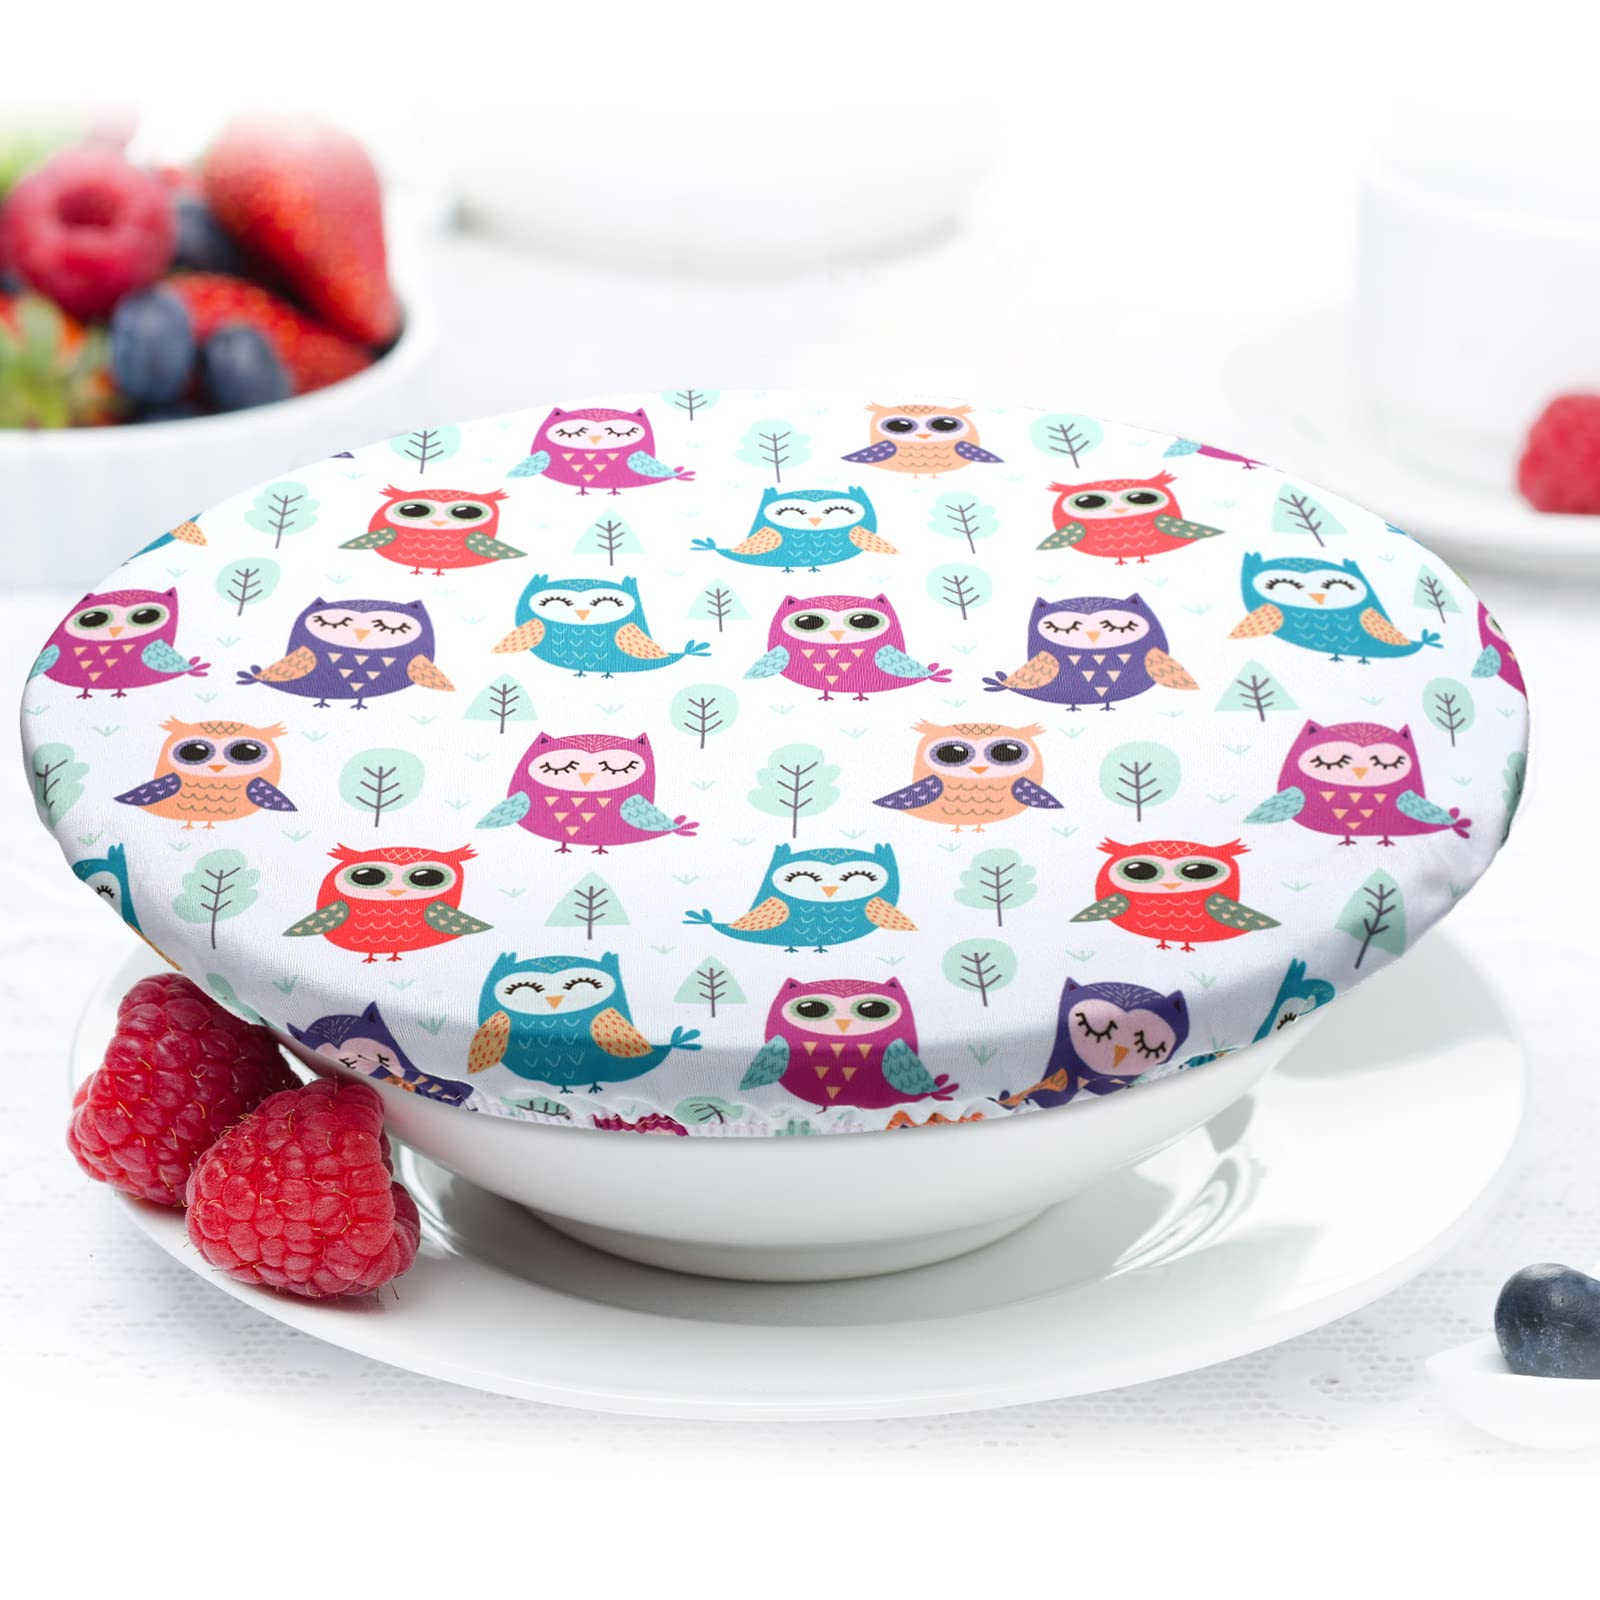 Wholesale Cute Style Reusable Bowl Covers Elastic Food Storage Covers Cotton Bread Covers Lids for Food, Fruits, Leftover